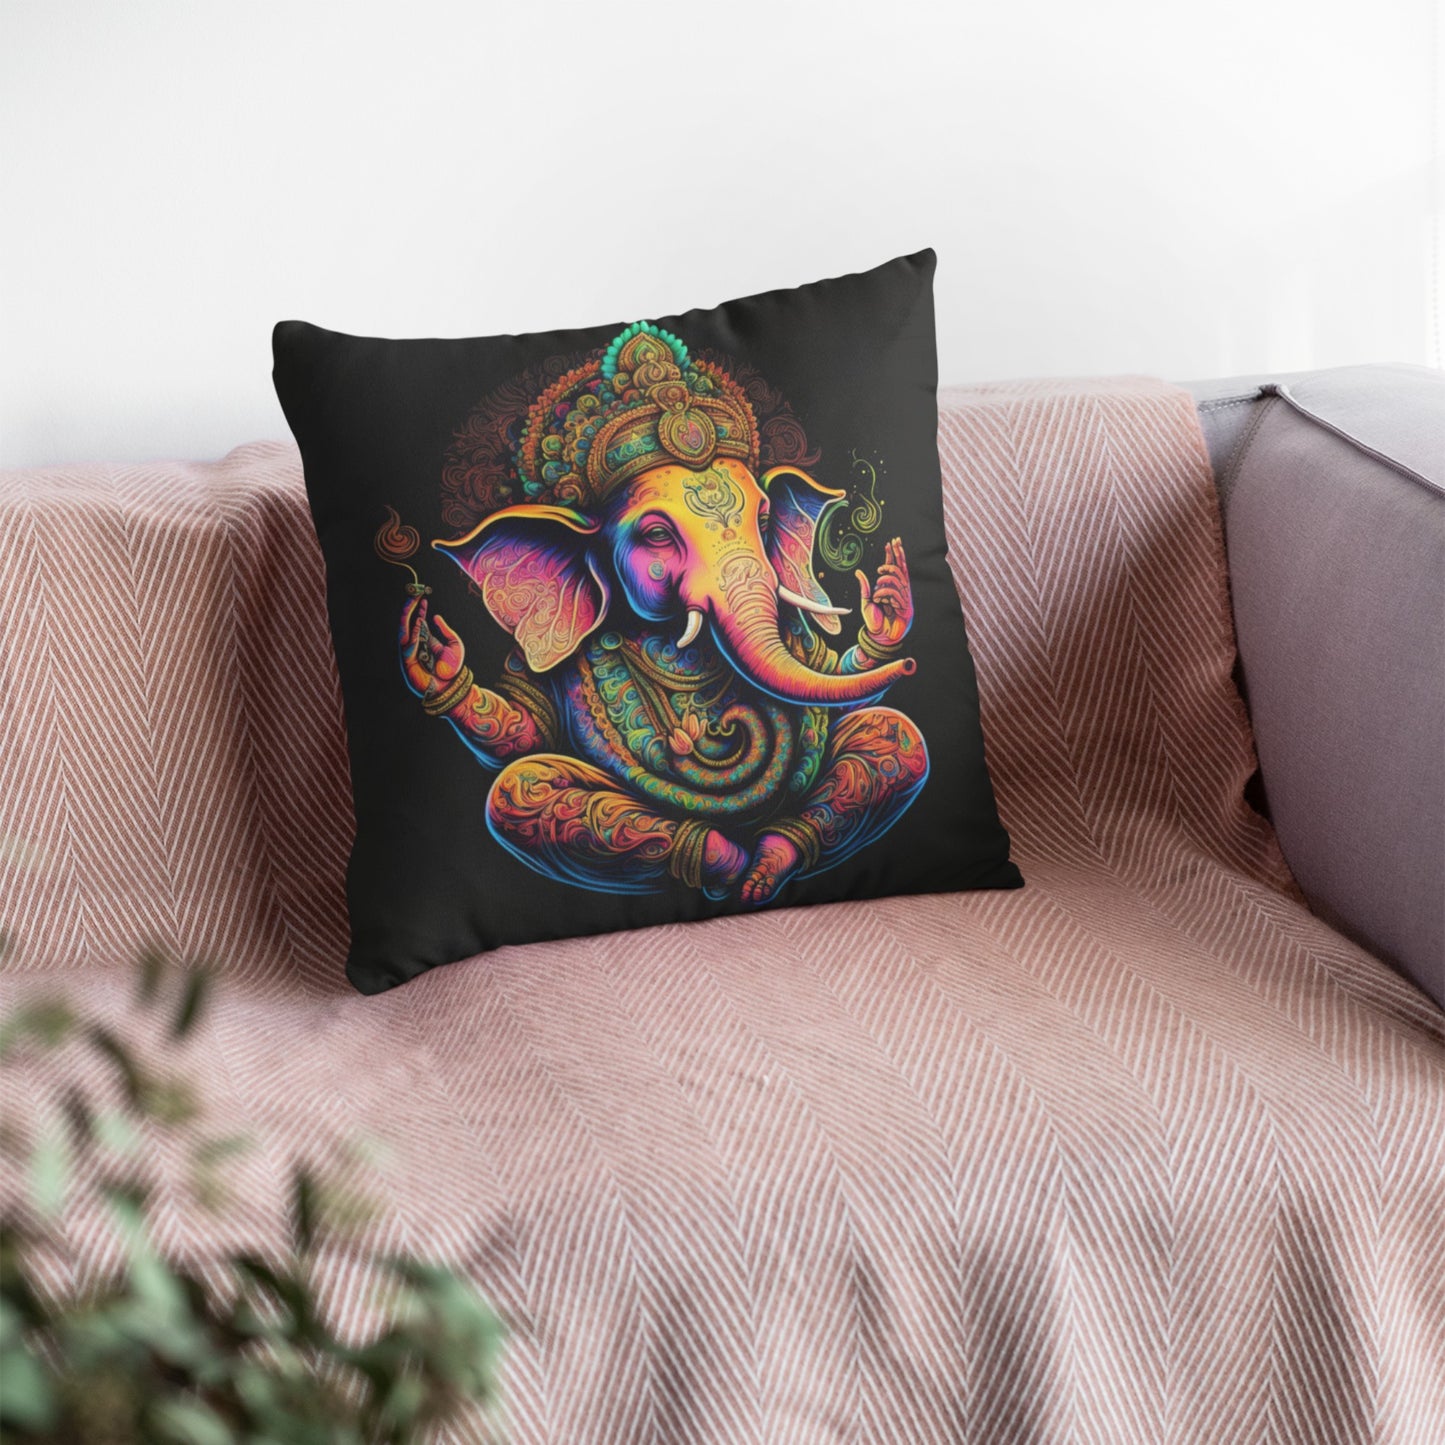 Mindful Elephant Patterned Throw Pillow